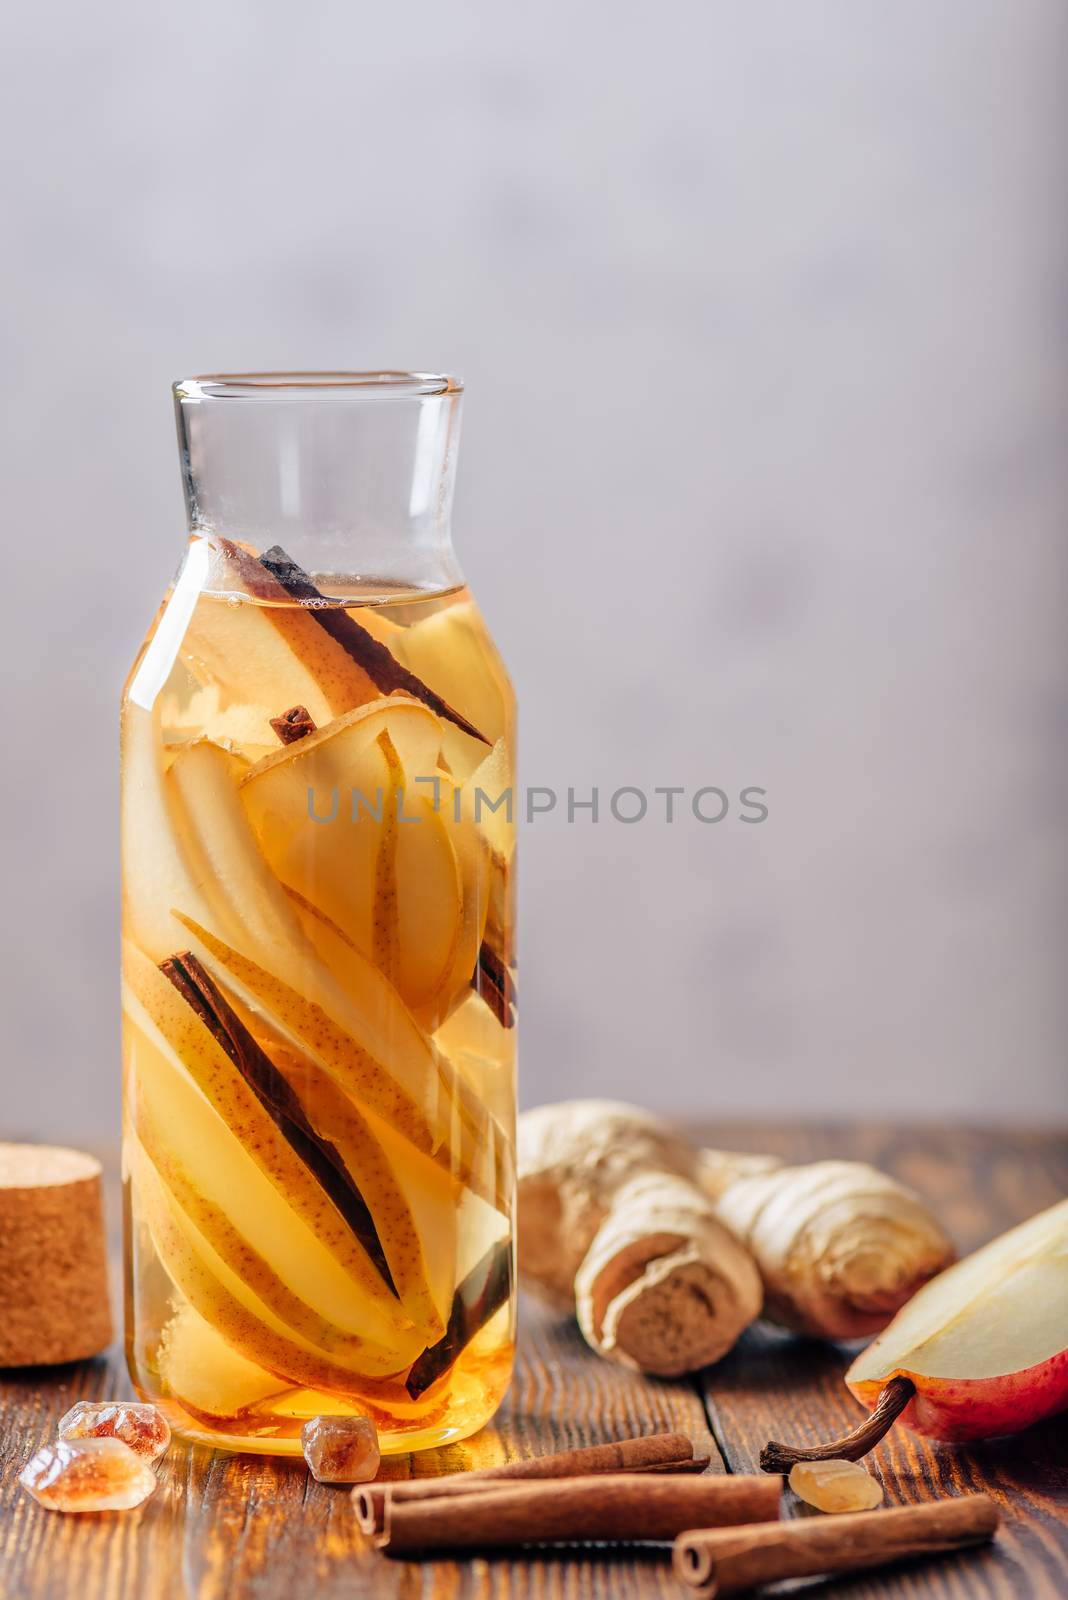 Water Flavored with Pear, Ginger Root and Cinnamon Stick. Some Ingredients on Table. Vertical Orientation and Copy Space.